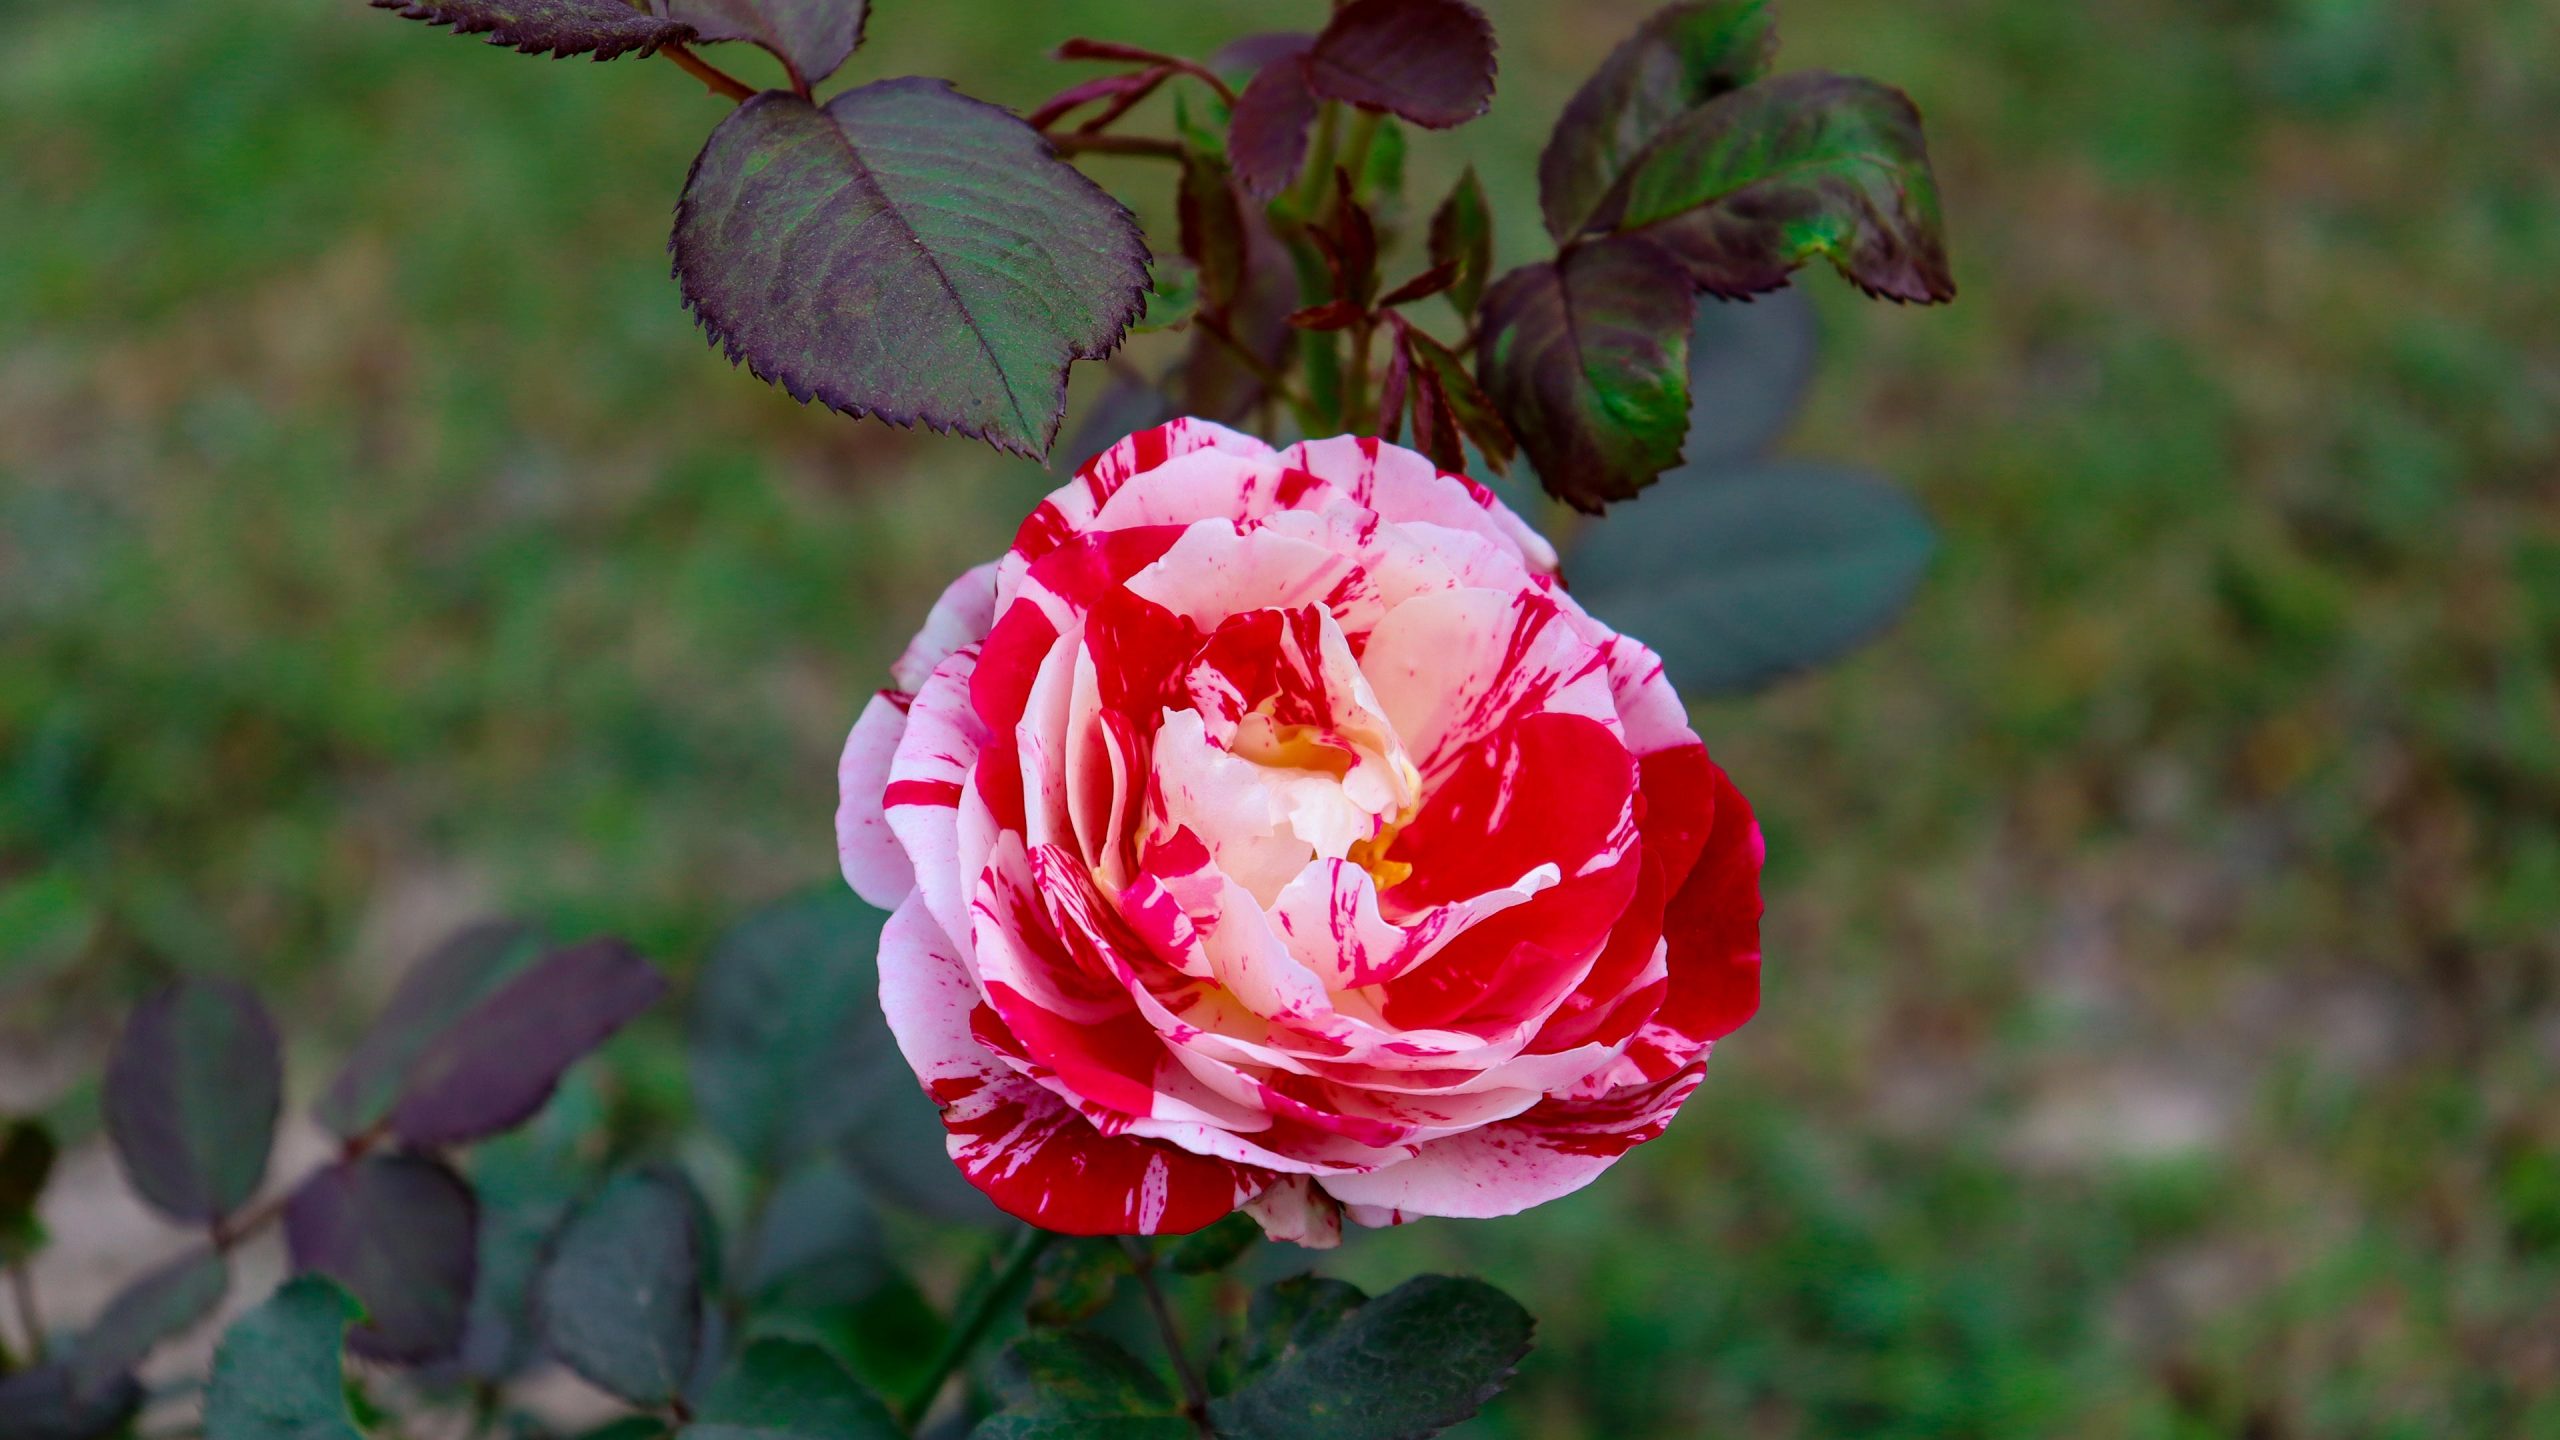 Blossomed White And Red Rose Photo Free Download